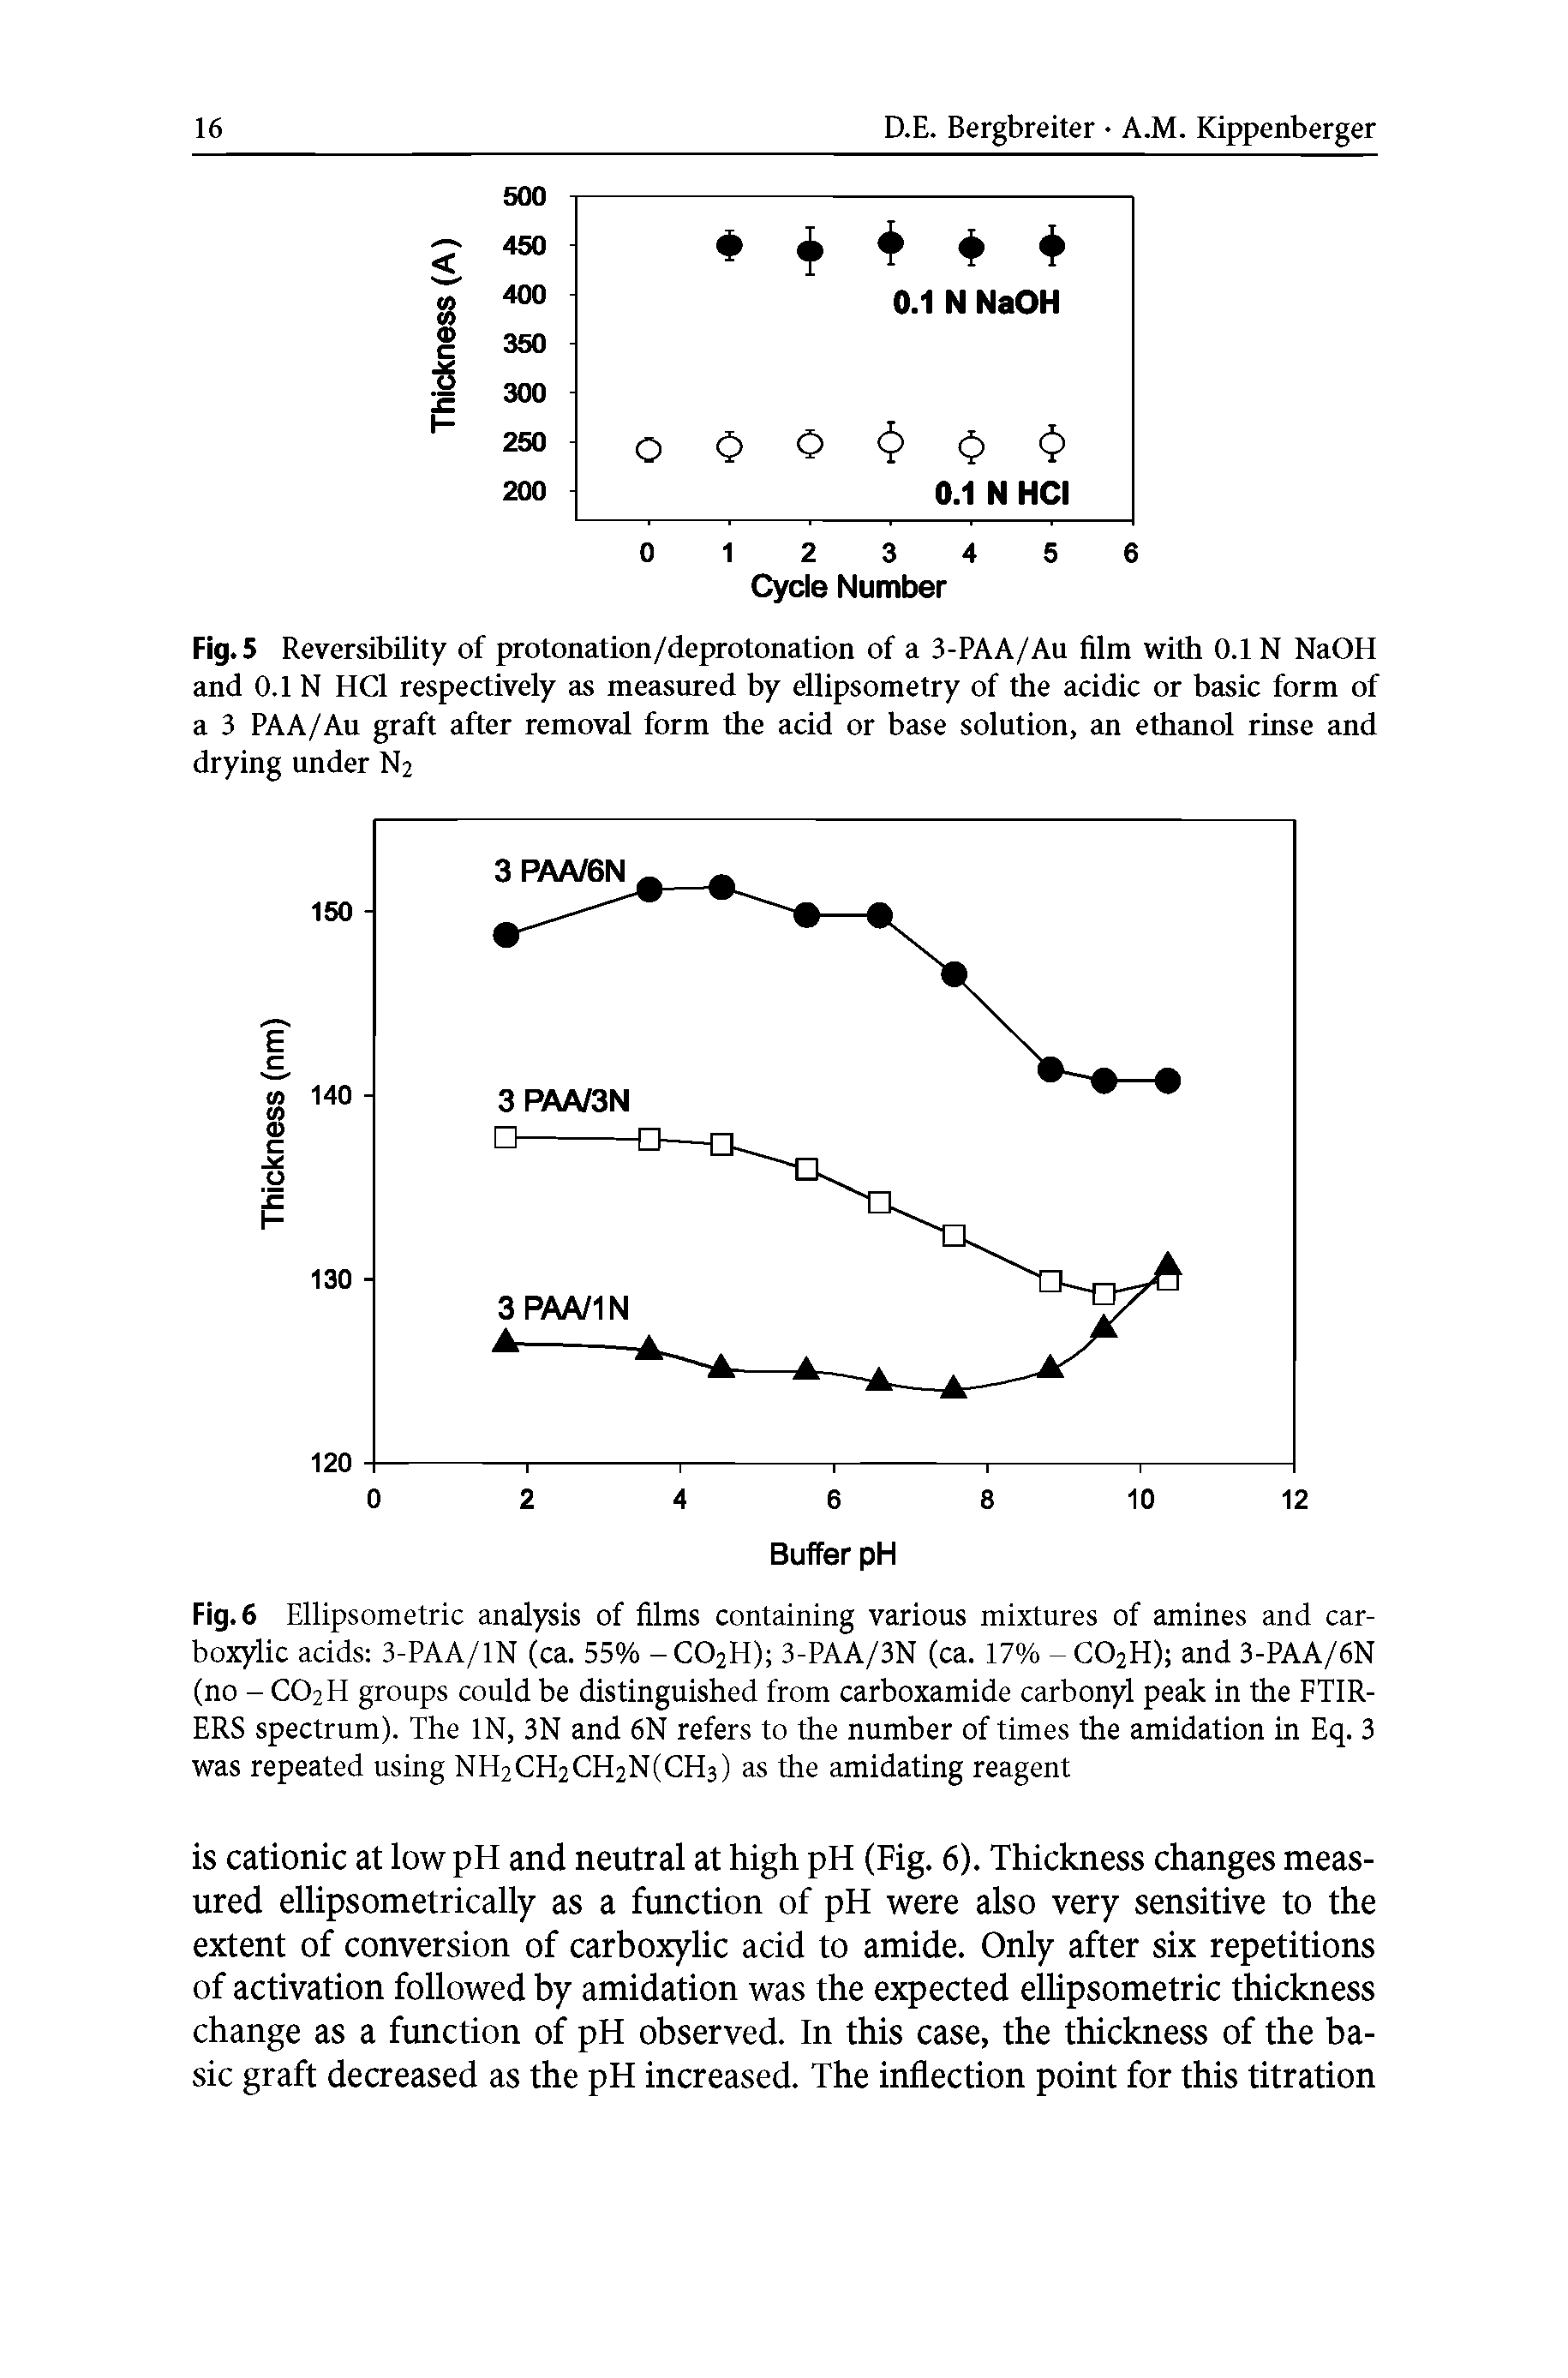 Fig. 6 Ellipsometric analysis of films containing various mixtures of amines and carboxylic acids 3-PAA/lN (ca. 55% -CO2H) 3-PAA/3N (ca. 17% -CO2H) and 3-PAA/6N (no - CO2H groups could be distinguished from carboxamide carbonyl peak in the FTIR-ERS spectrum). The IN, 3N and 6N refers to the number of times the amidation in Eq. 3 was repeated using NH2CH2CH2N(CH3) as the amidating reagent...